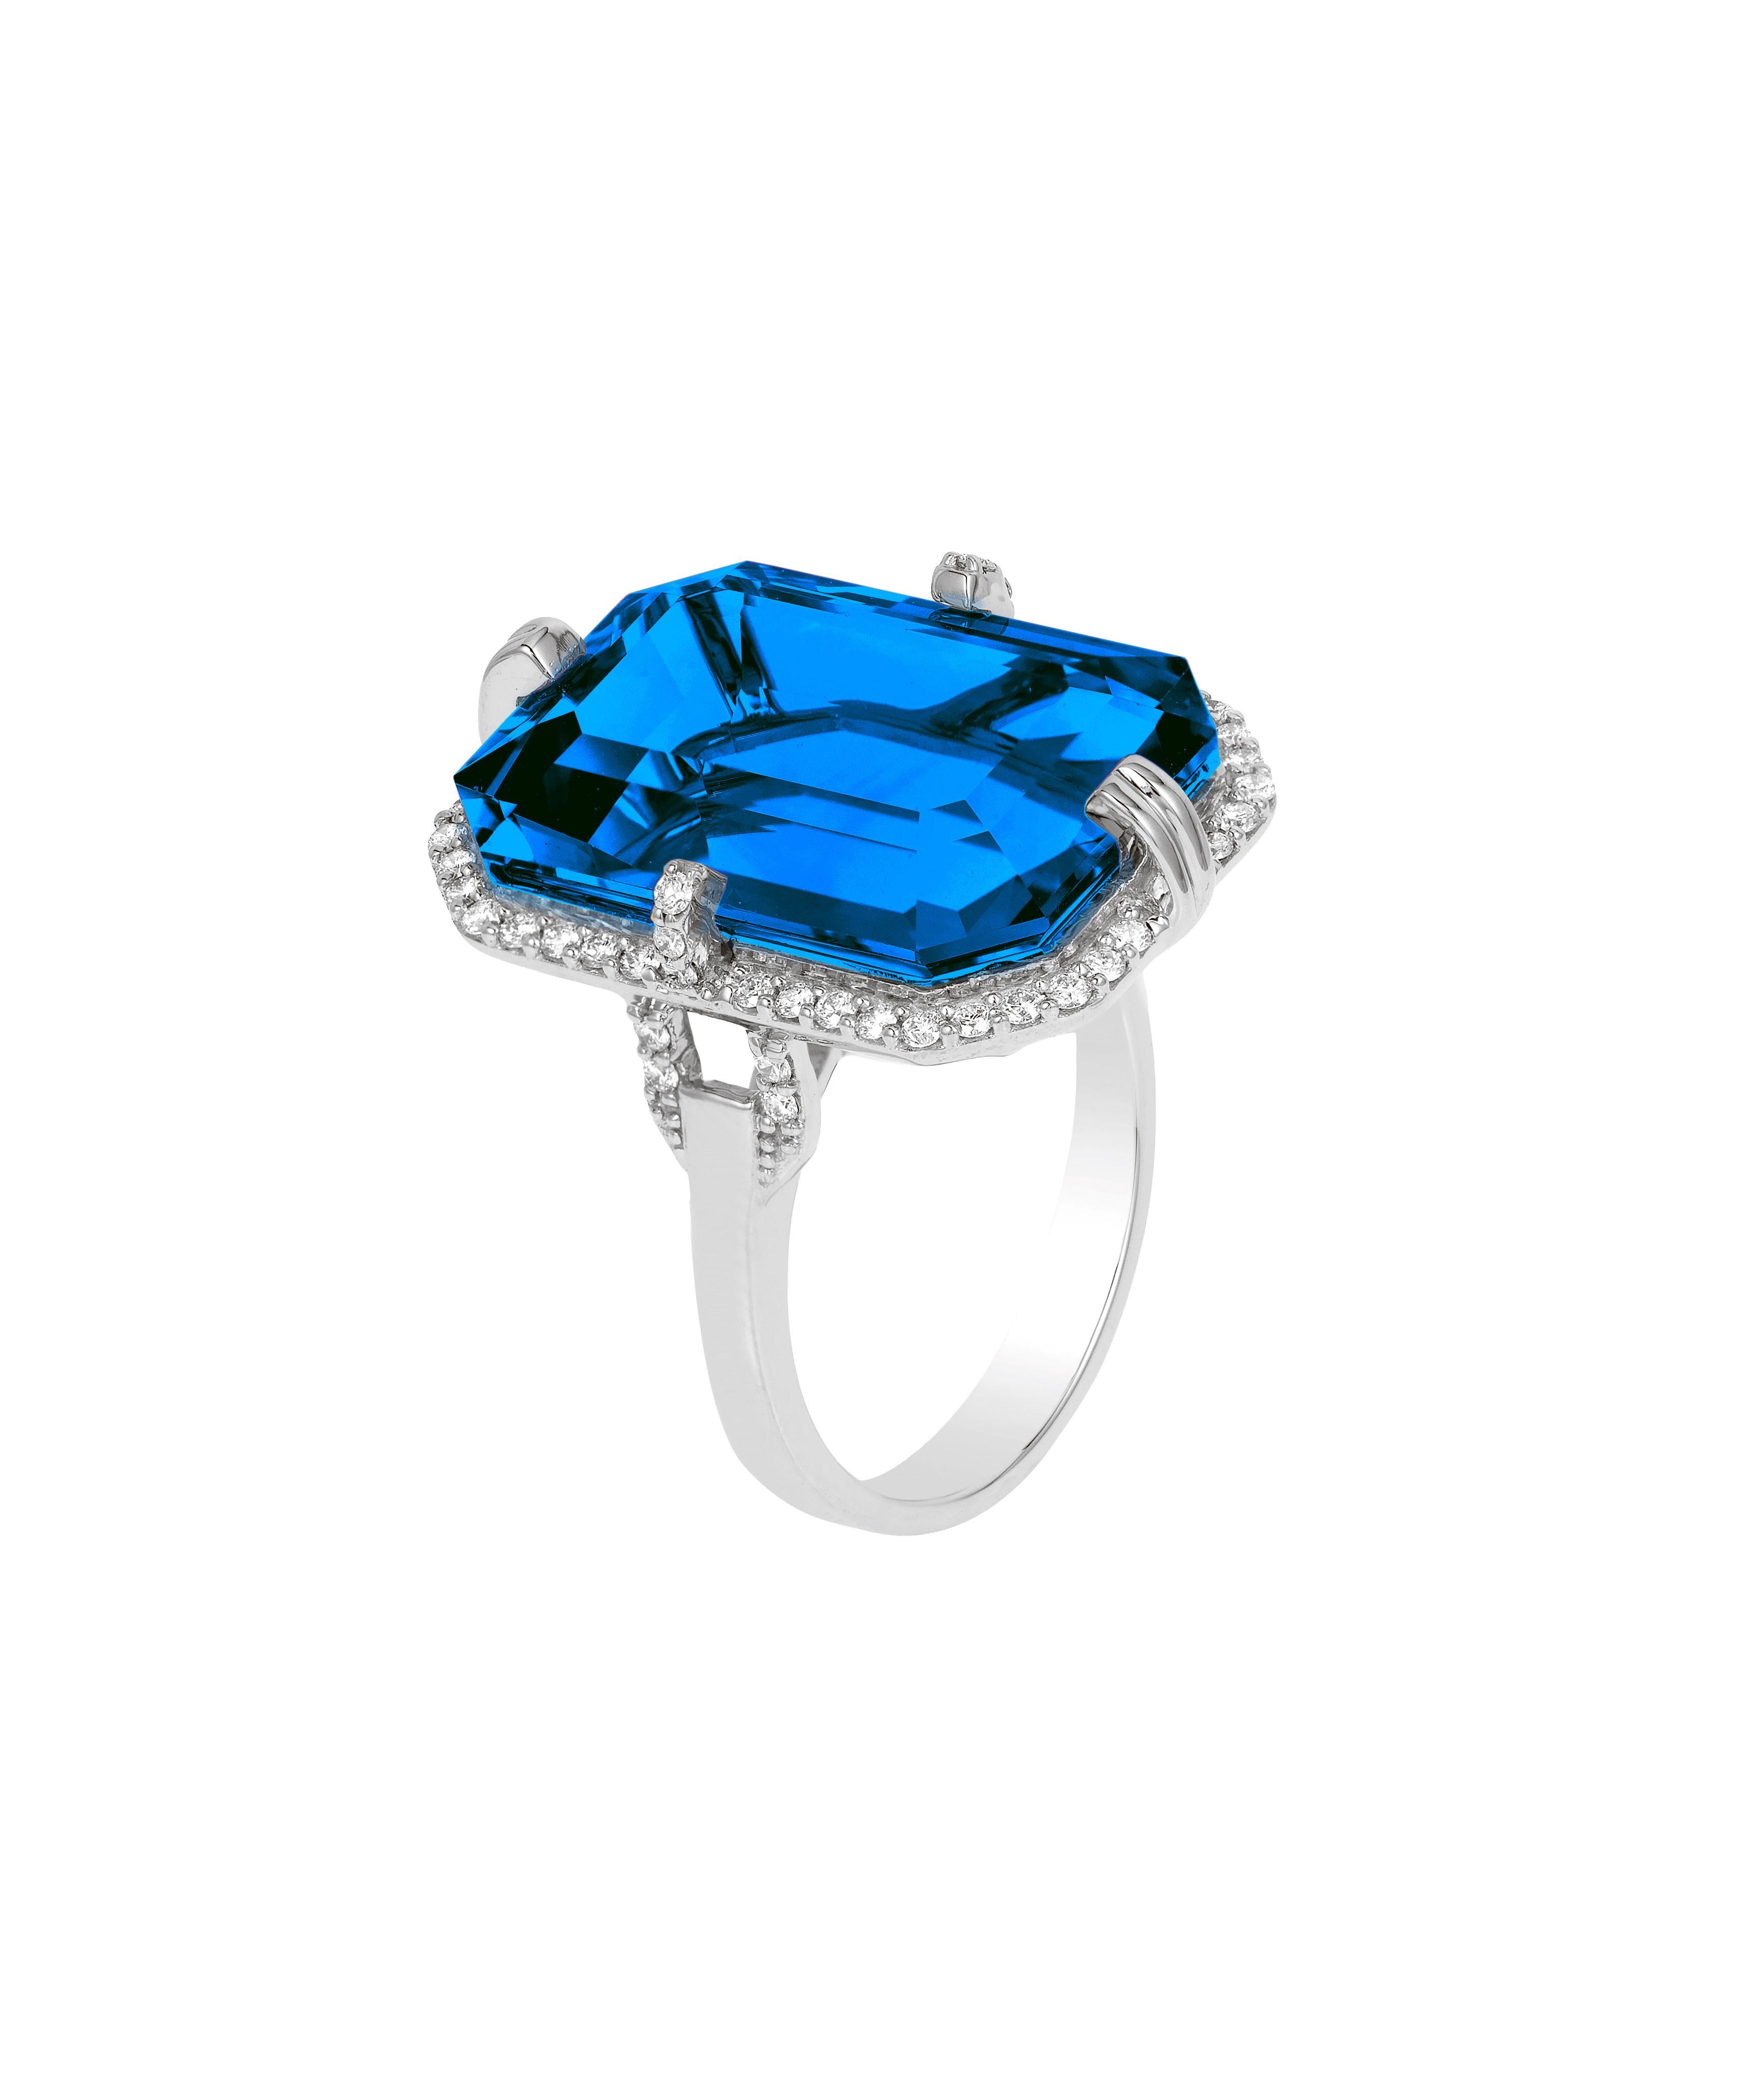 London Blue Topaz Emerald Cut Ring with Diamonds in 18K White Gold, From 'Gossip' Collection

Stone Size: 20 x 14 mm 

Gemstone Approx Wt: London Blue Topaz - 21.60 Carats

Diamonds: G-H / VS, Approx Wt: 0.41 Carats